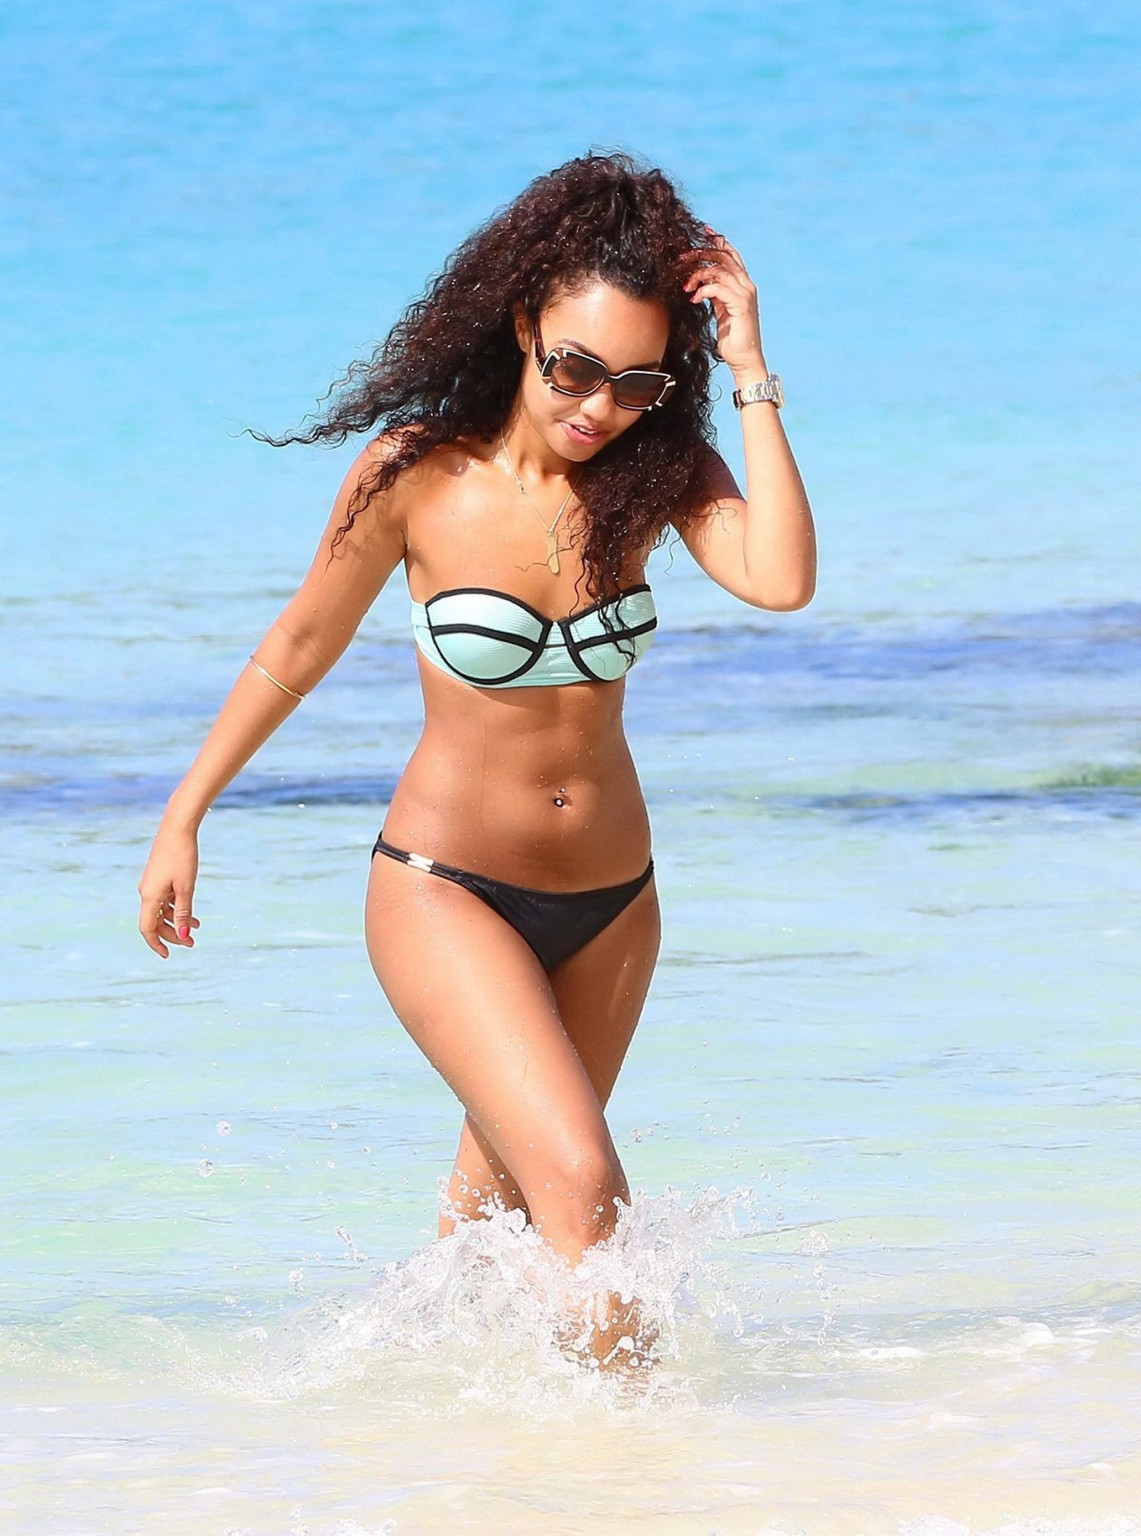 LeighAnne Pinnock wearing tiny strapless bikini at the beach in Barbados #75177621